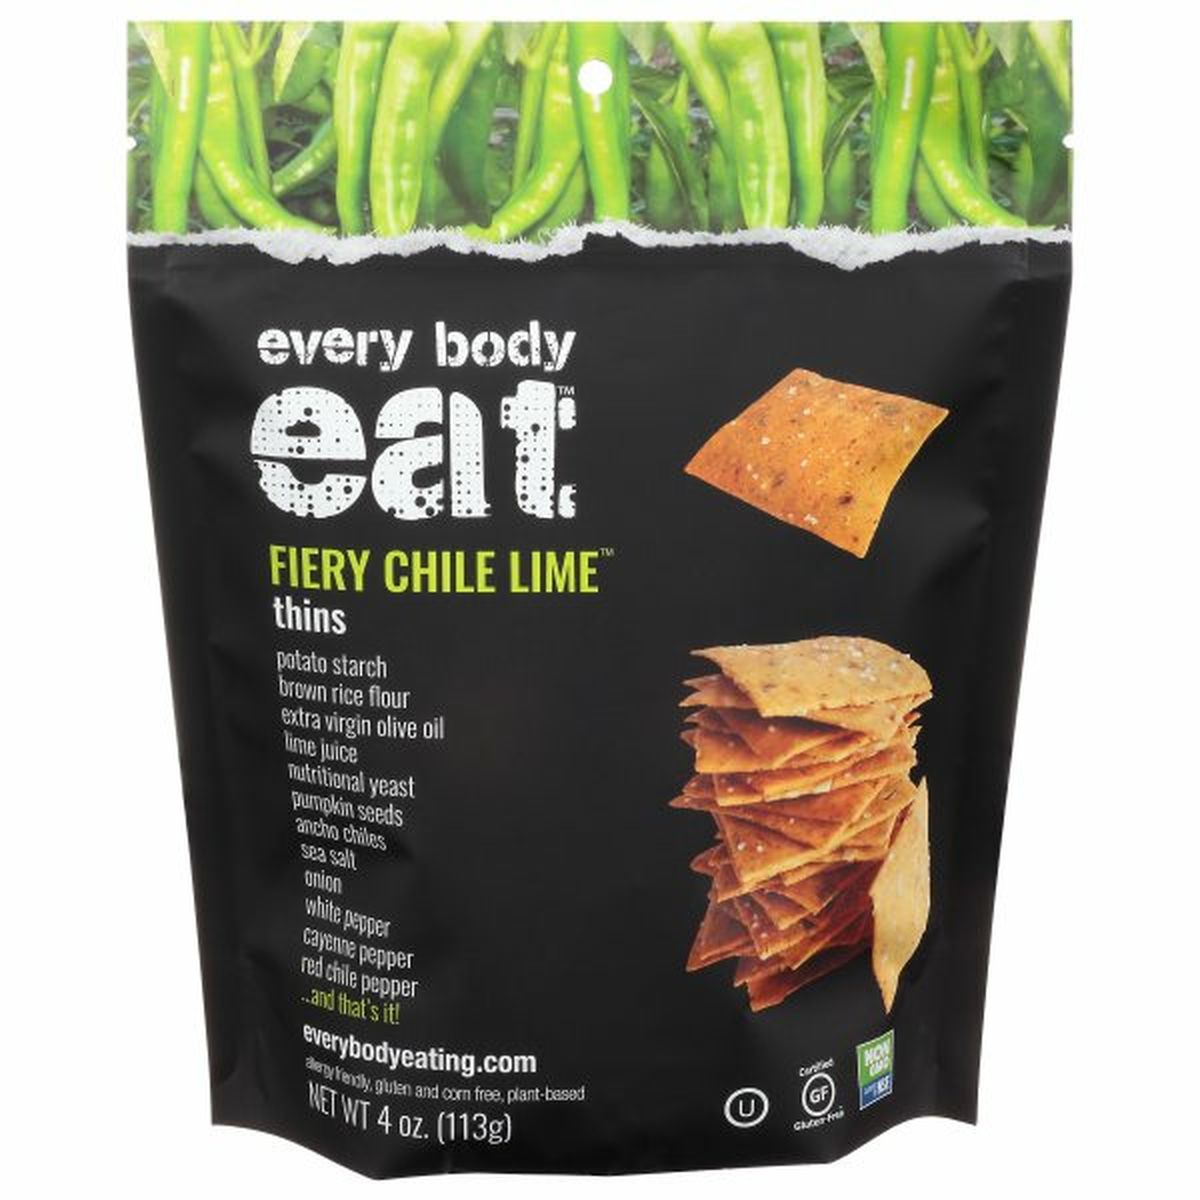 Calories in Every Body Eat Thins, Fiery Chile Lime